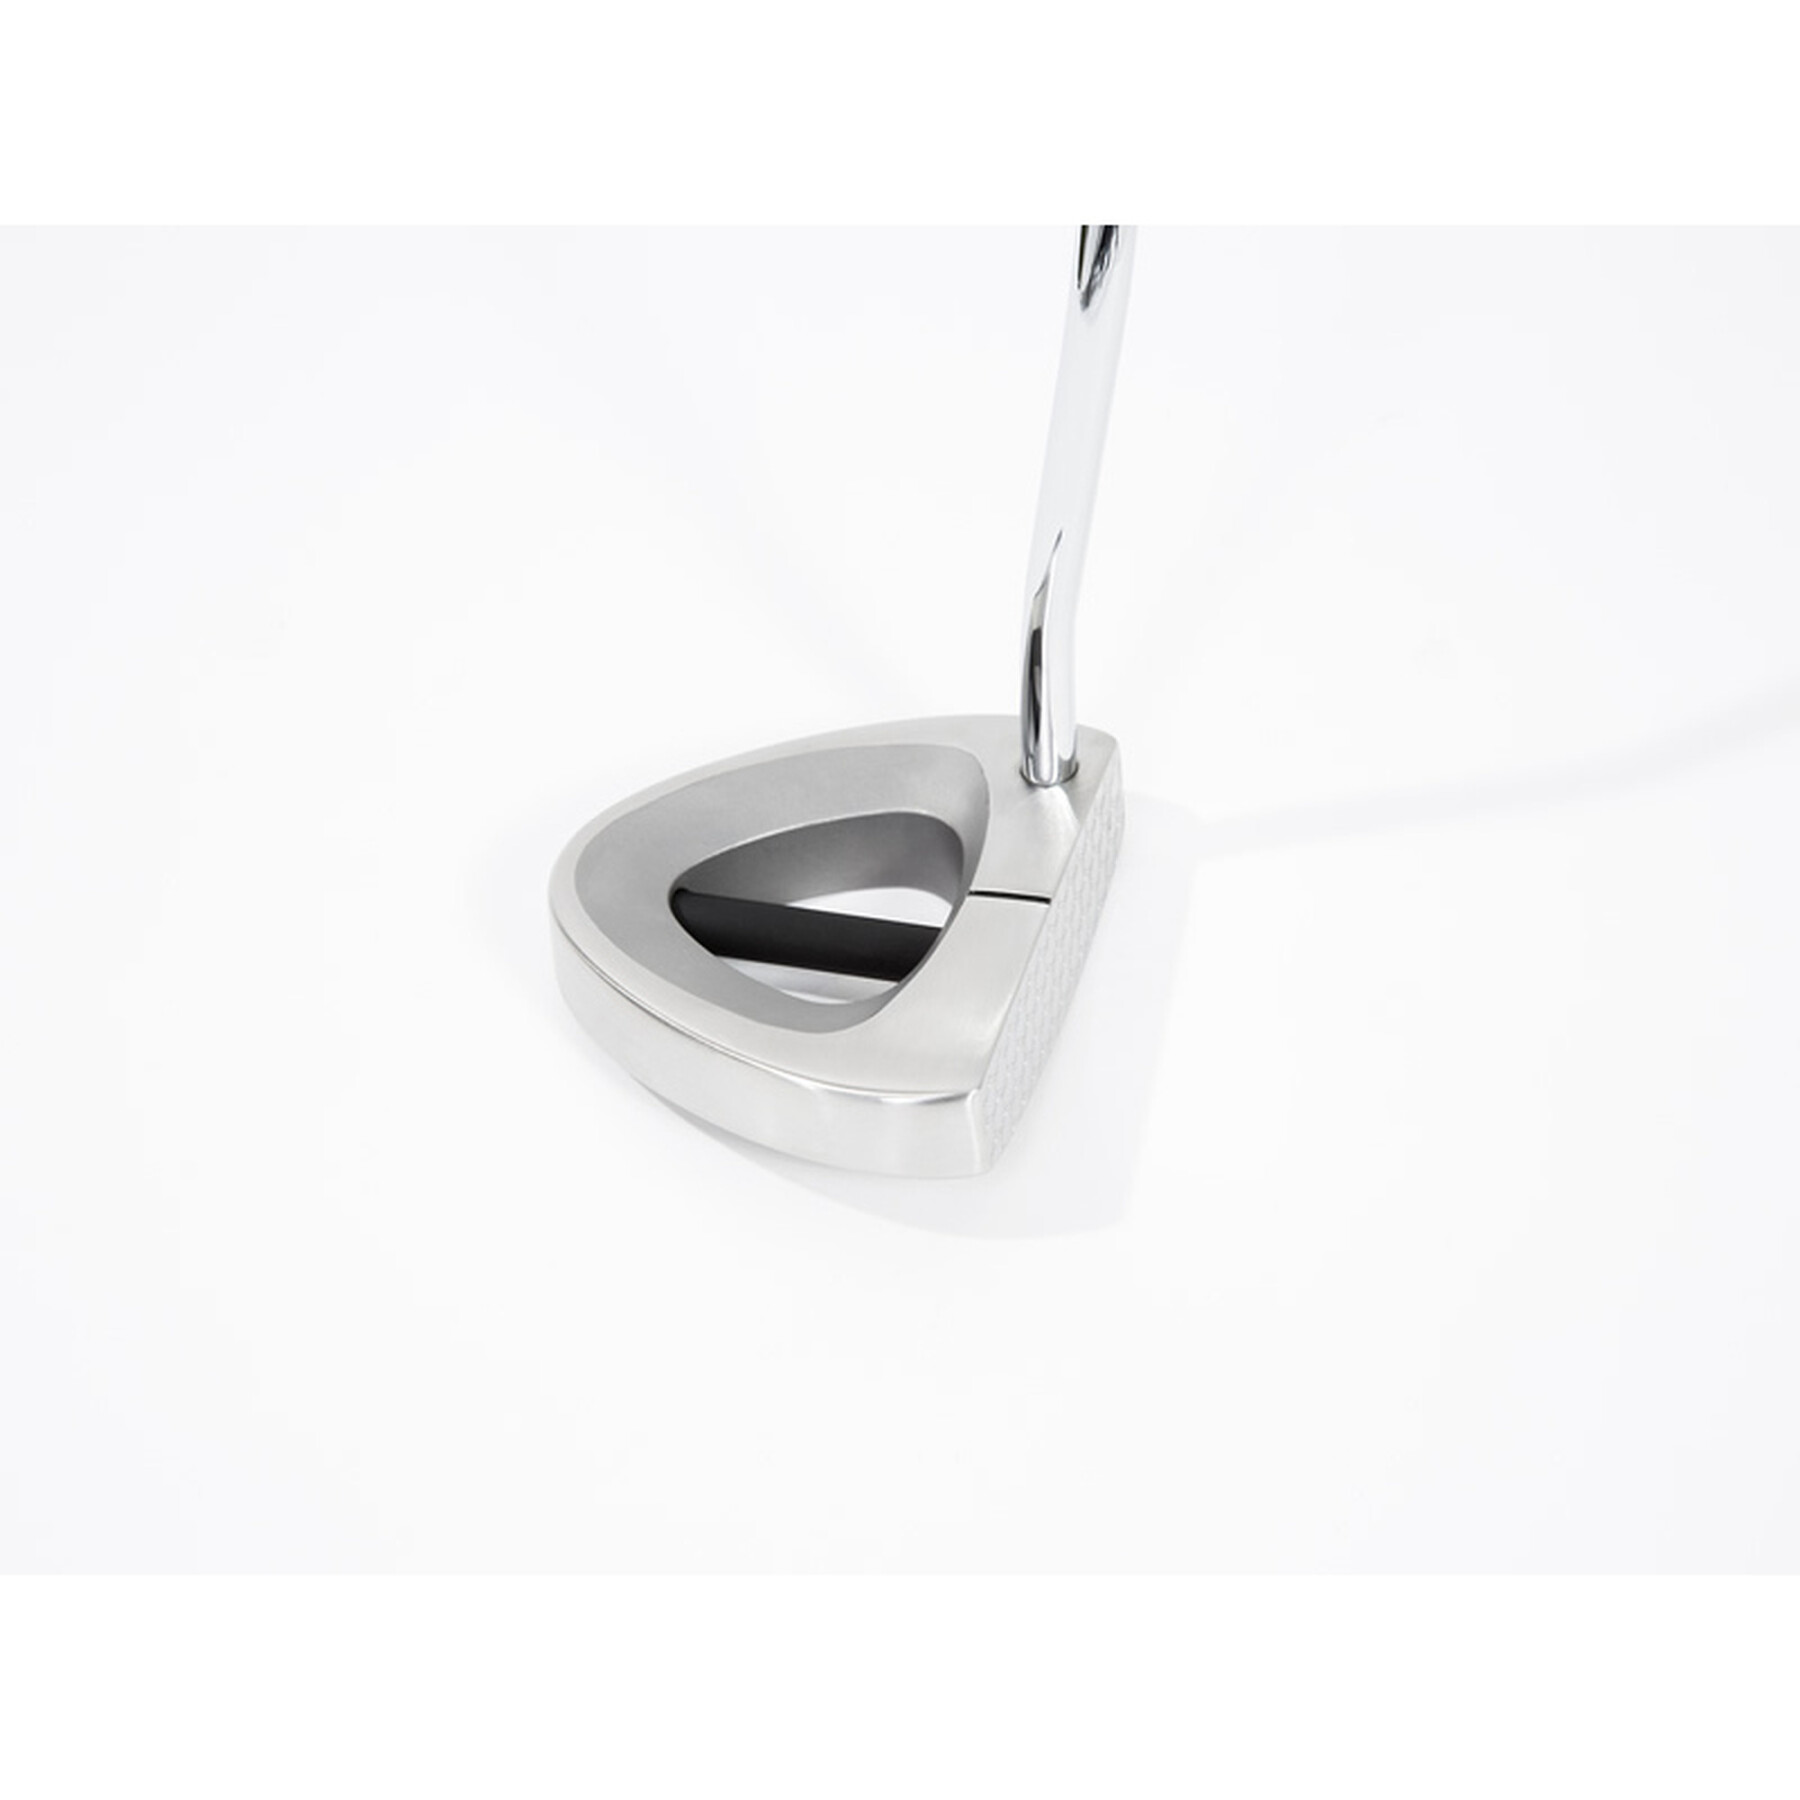 Putter maillet Droitier X800 JuCad 35' inches